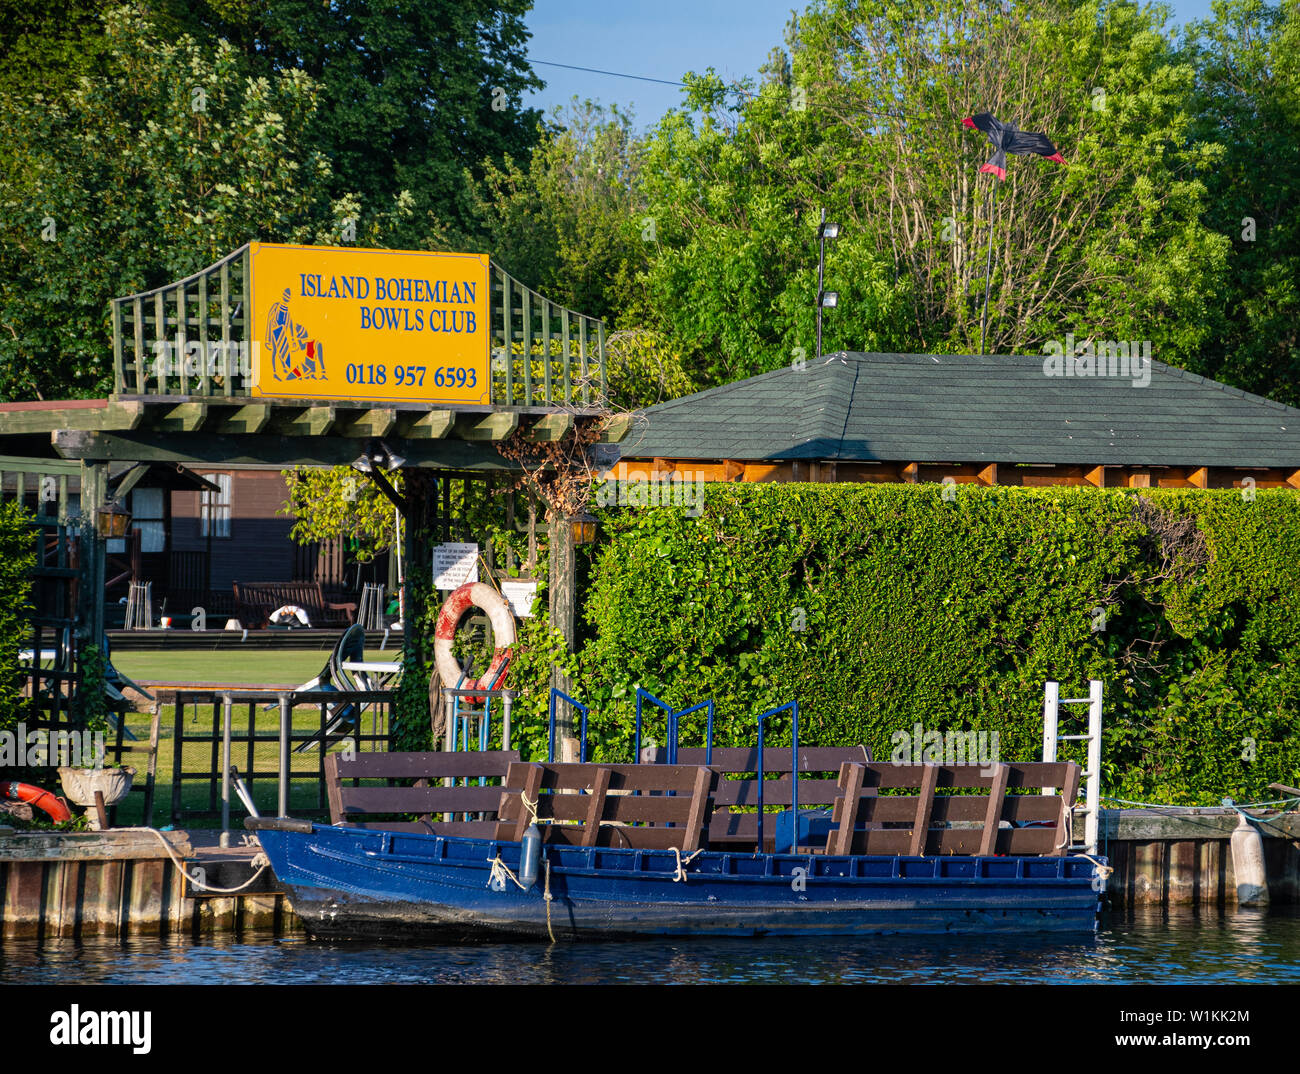 Reading, United Kingdom - May 24 2019:   The sign above the entrance to the Island Bohemian Bowls Club on a small island in the middle of the River Th Stock Photo